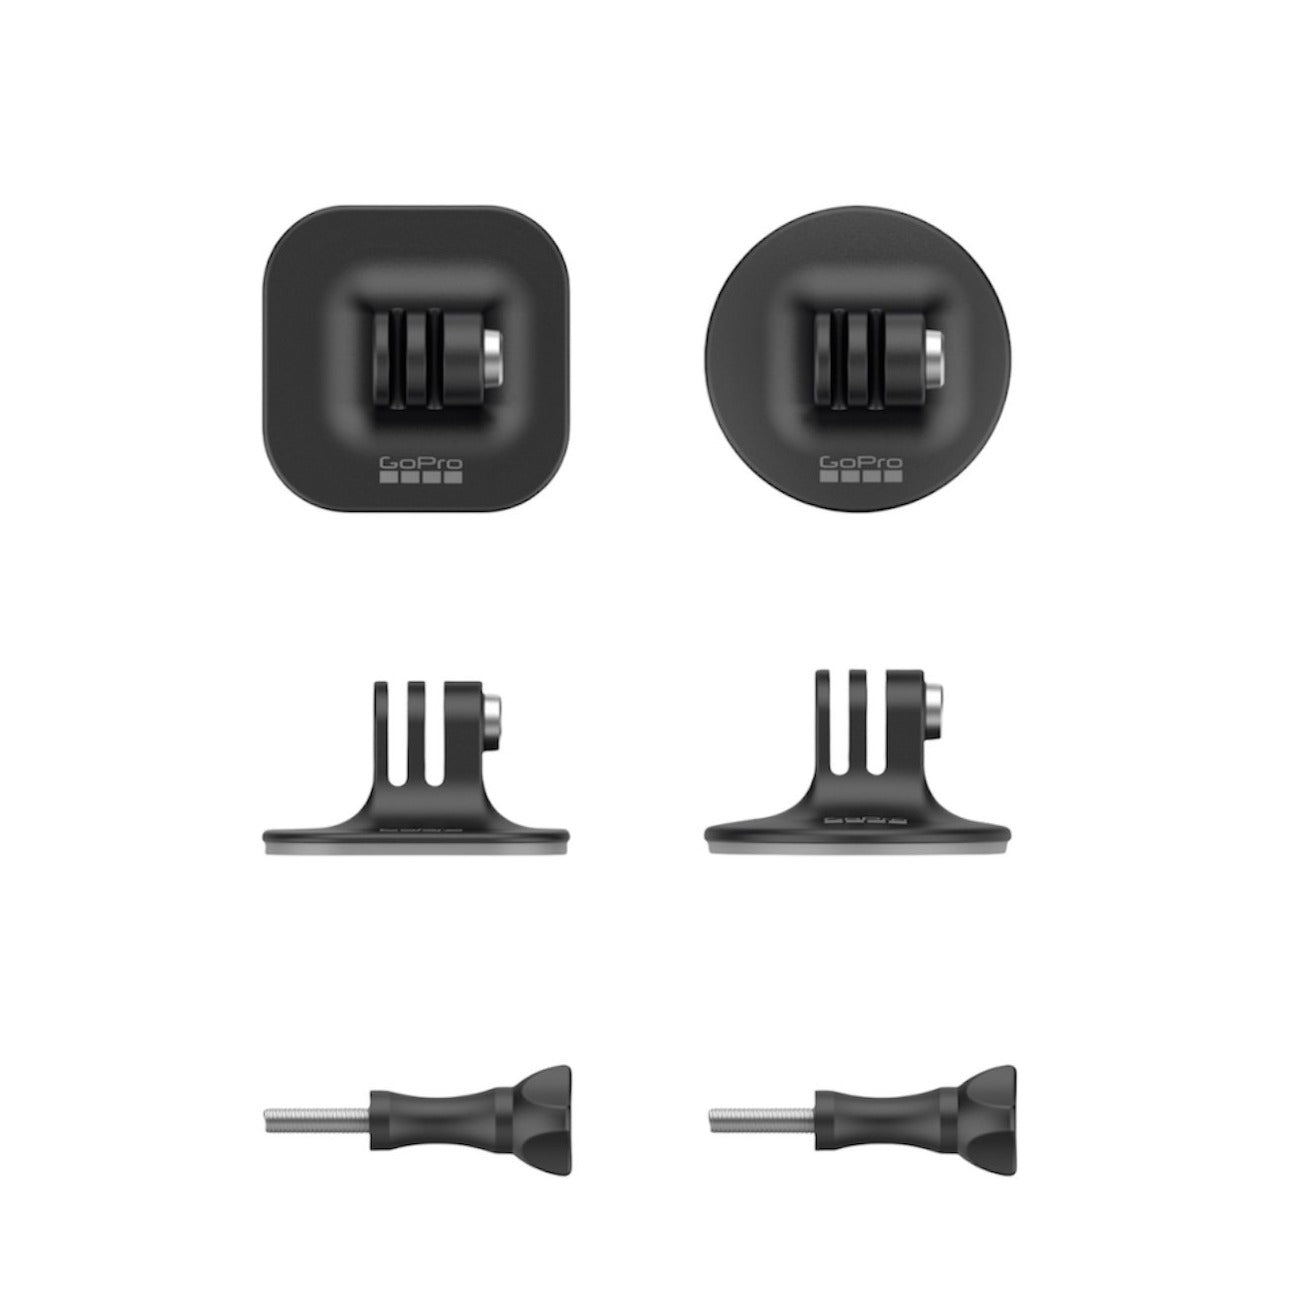 Fusion Mounts For GoPro, deal of the day, black friday deals, bargain, liquidation